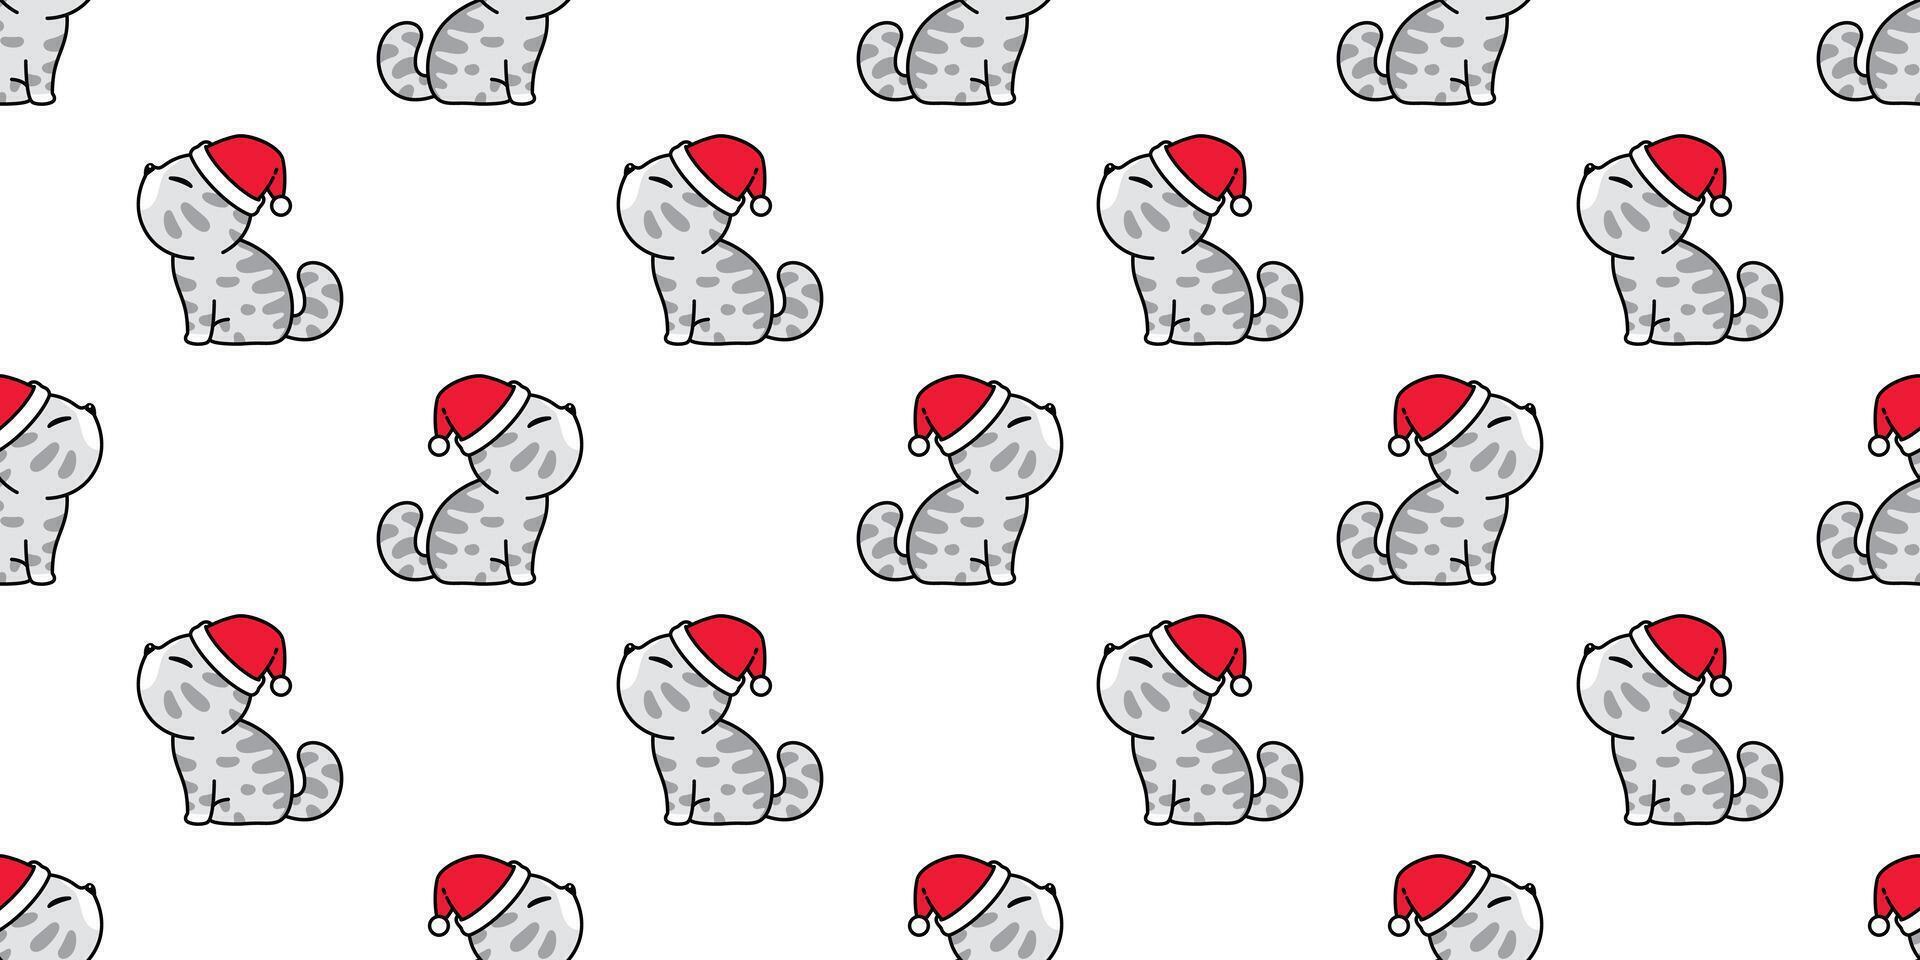 cat seamless pattern Christmas Santa Claus hat kitten cartoon repeat wallpaper scarf isolated tile background illustration doodle design vector